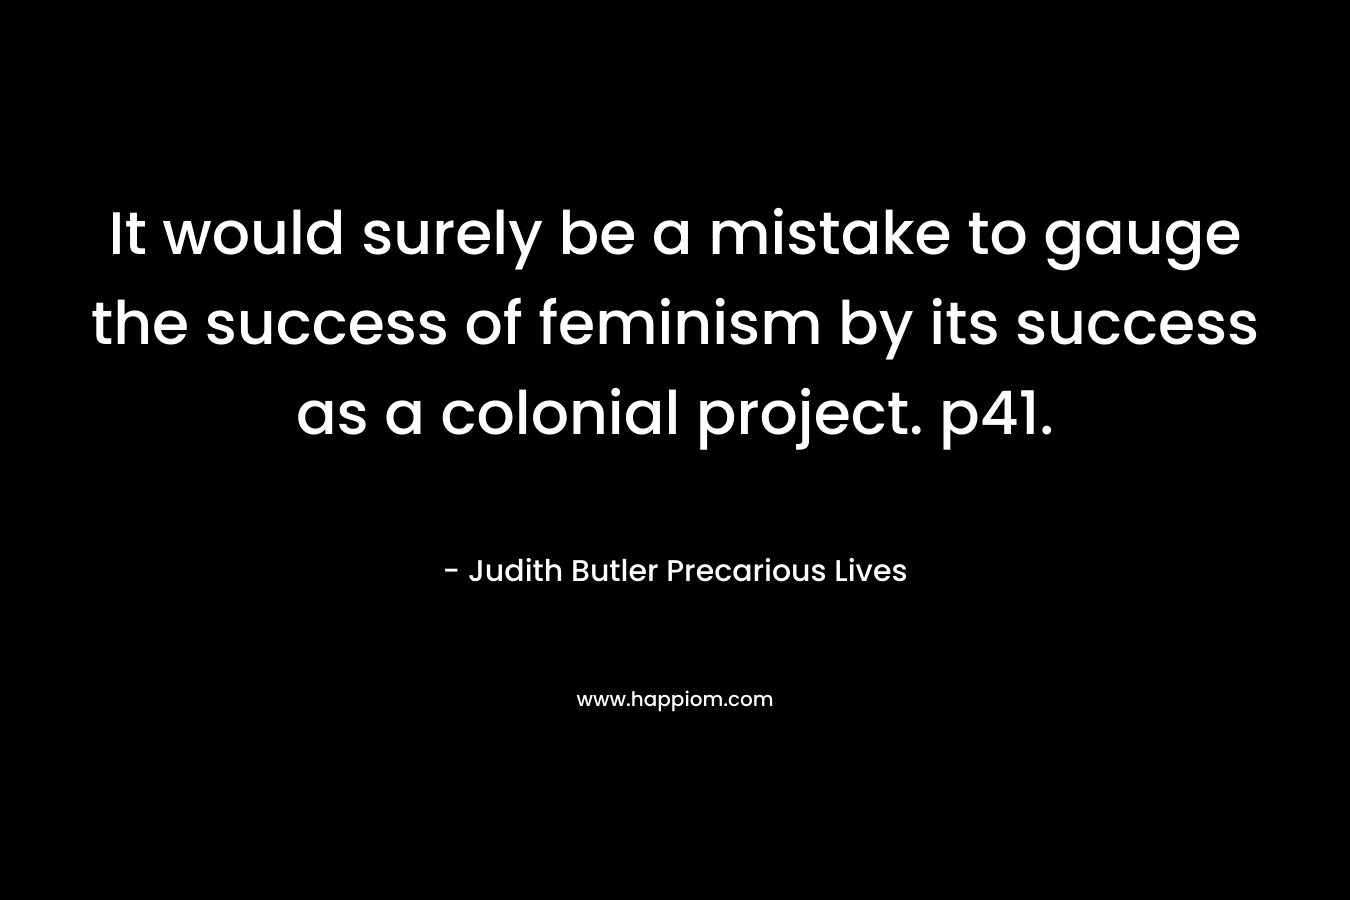 It would surely be a mistake to gauge the success of feminism by its success as a colonial project. p41. – Judith Butler Precarious Lives